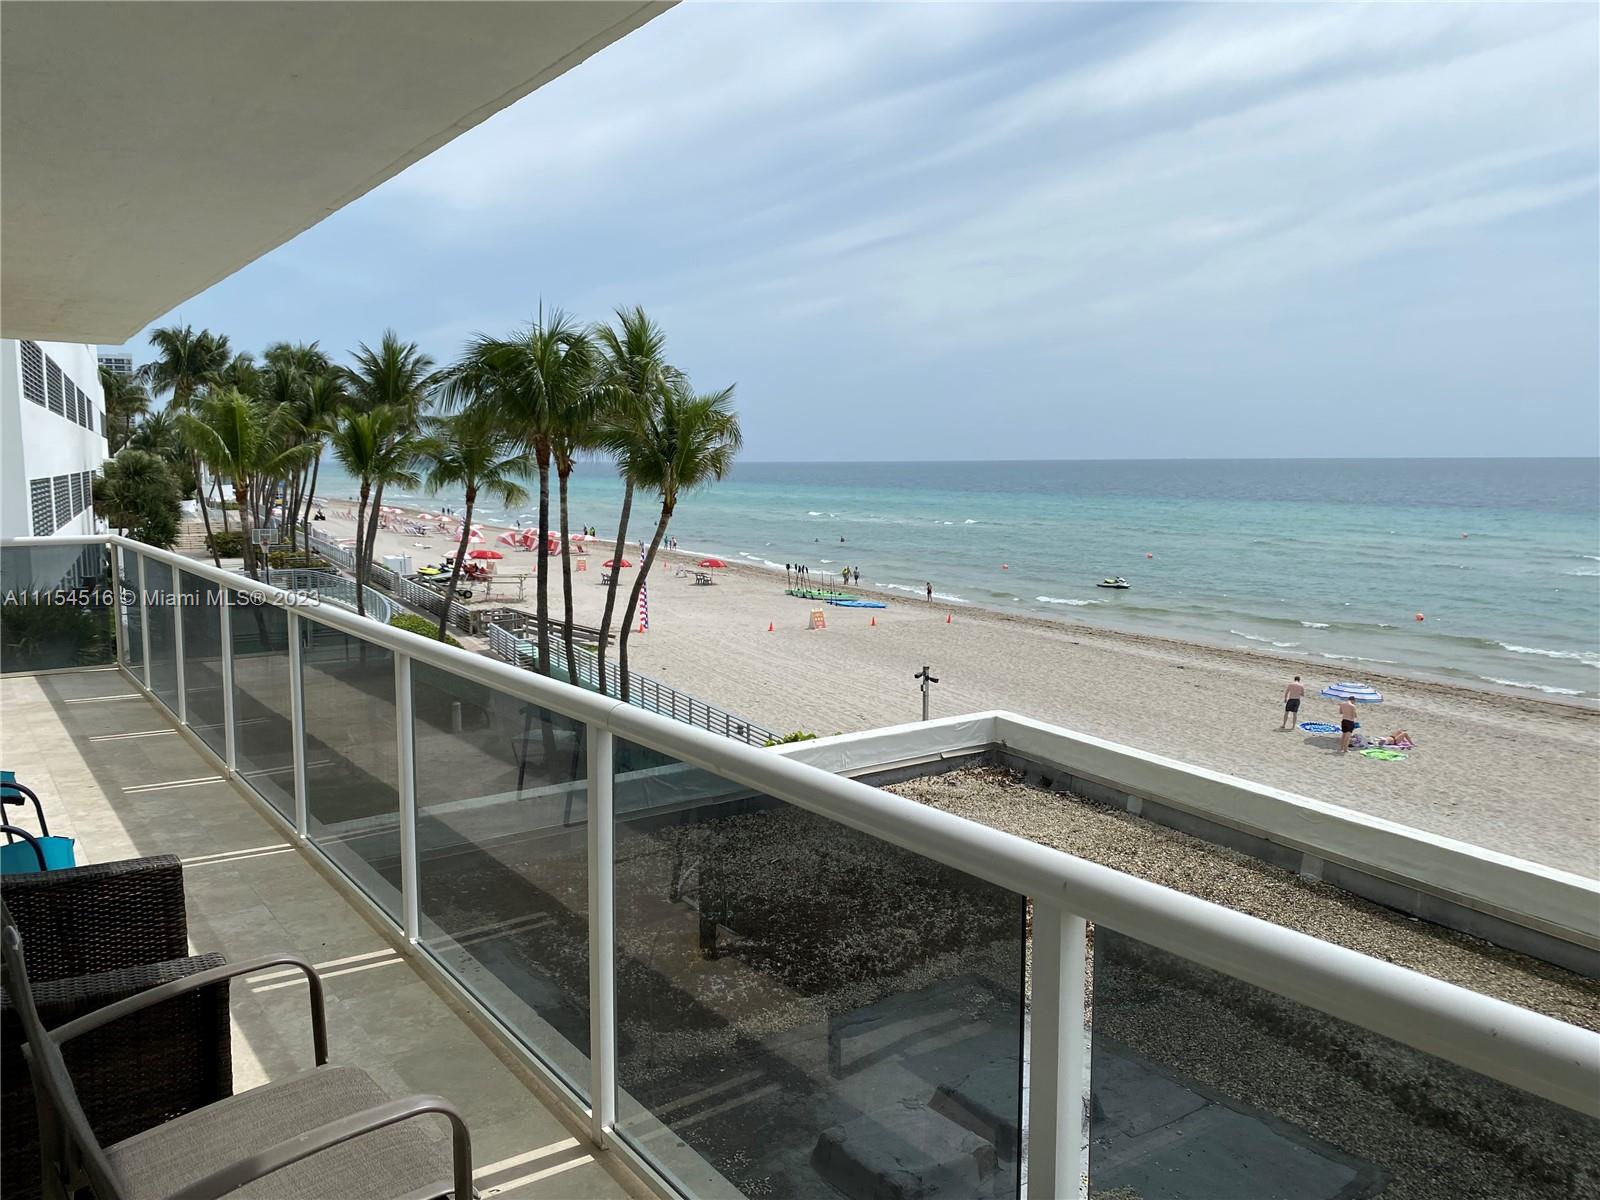 3725 S Ocean Dr 301, Hollywood, Florida 33019, 2 Bedrooms Bedrooms, ,2 BathroomsBathrooms,Residentiallease,For Rent,3725 S Ocean Dr 301,A11154516